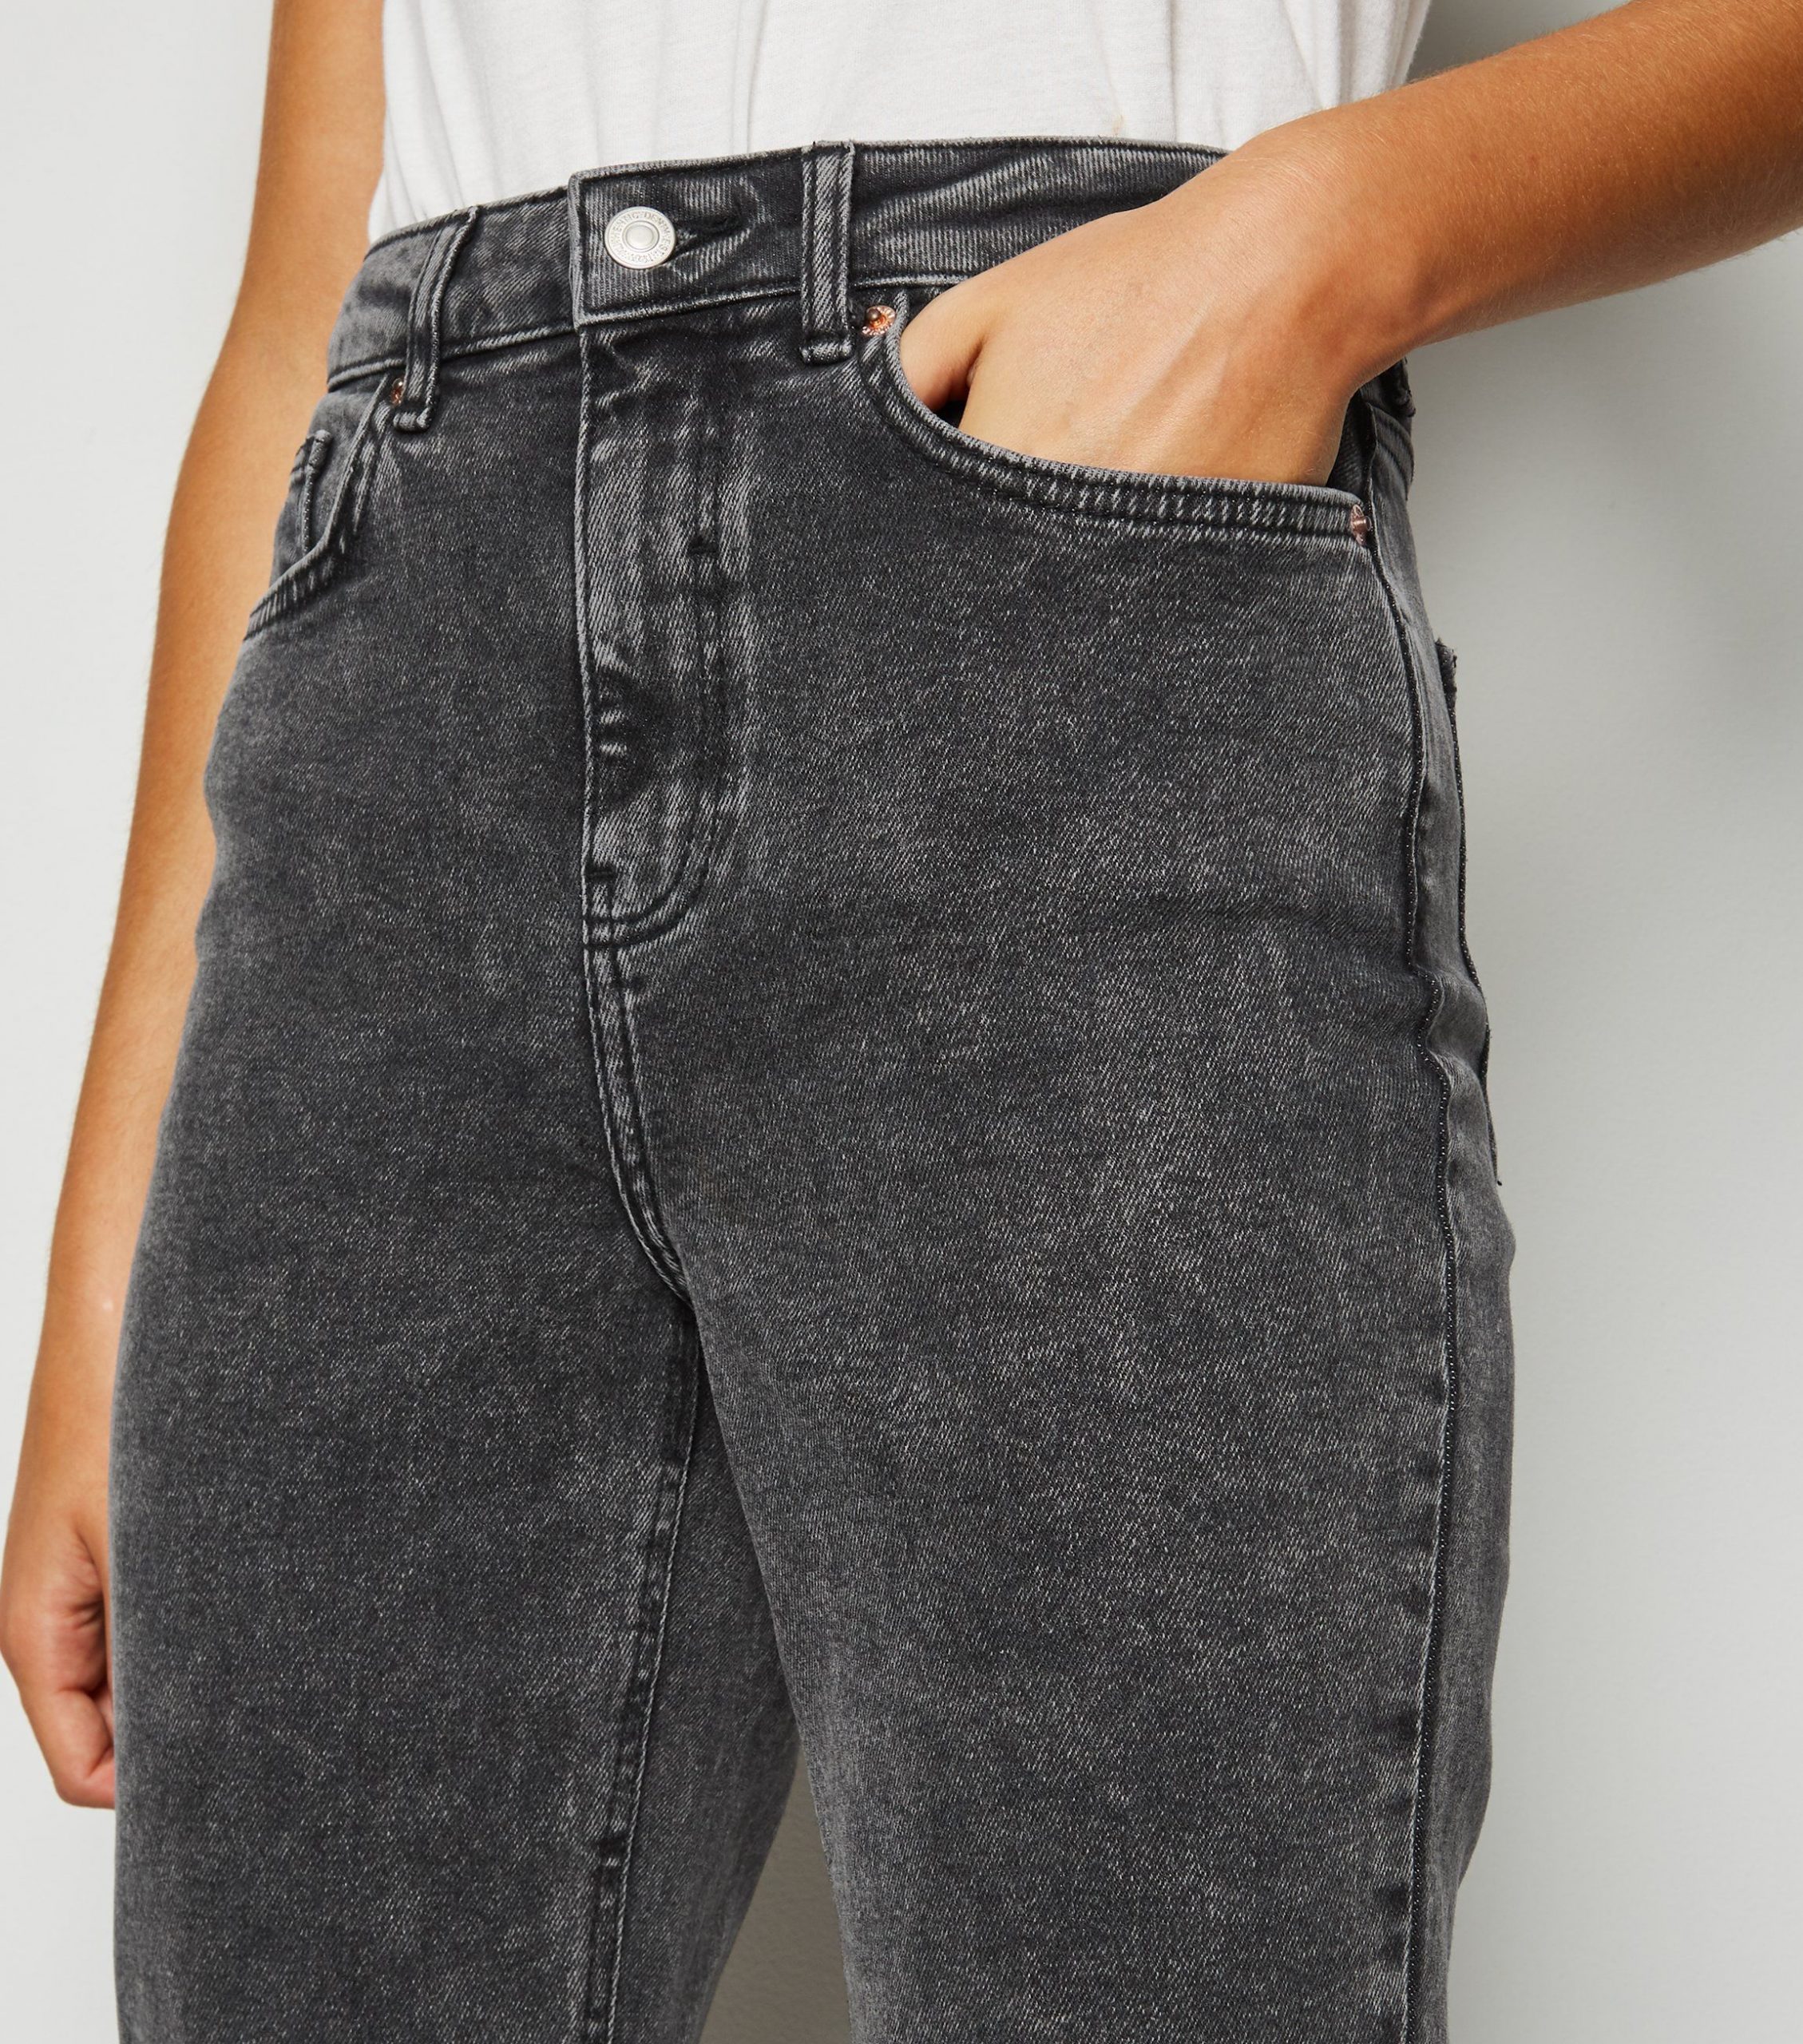 Selected cotton relaxed crop jeans in dark gray wash - GRAY - ShopStyle